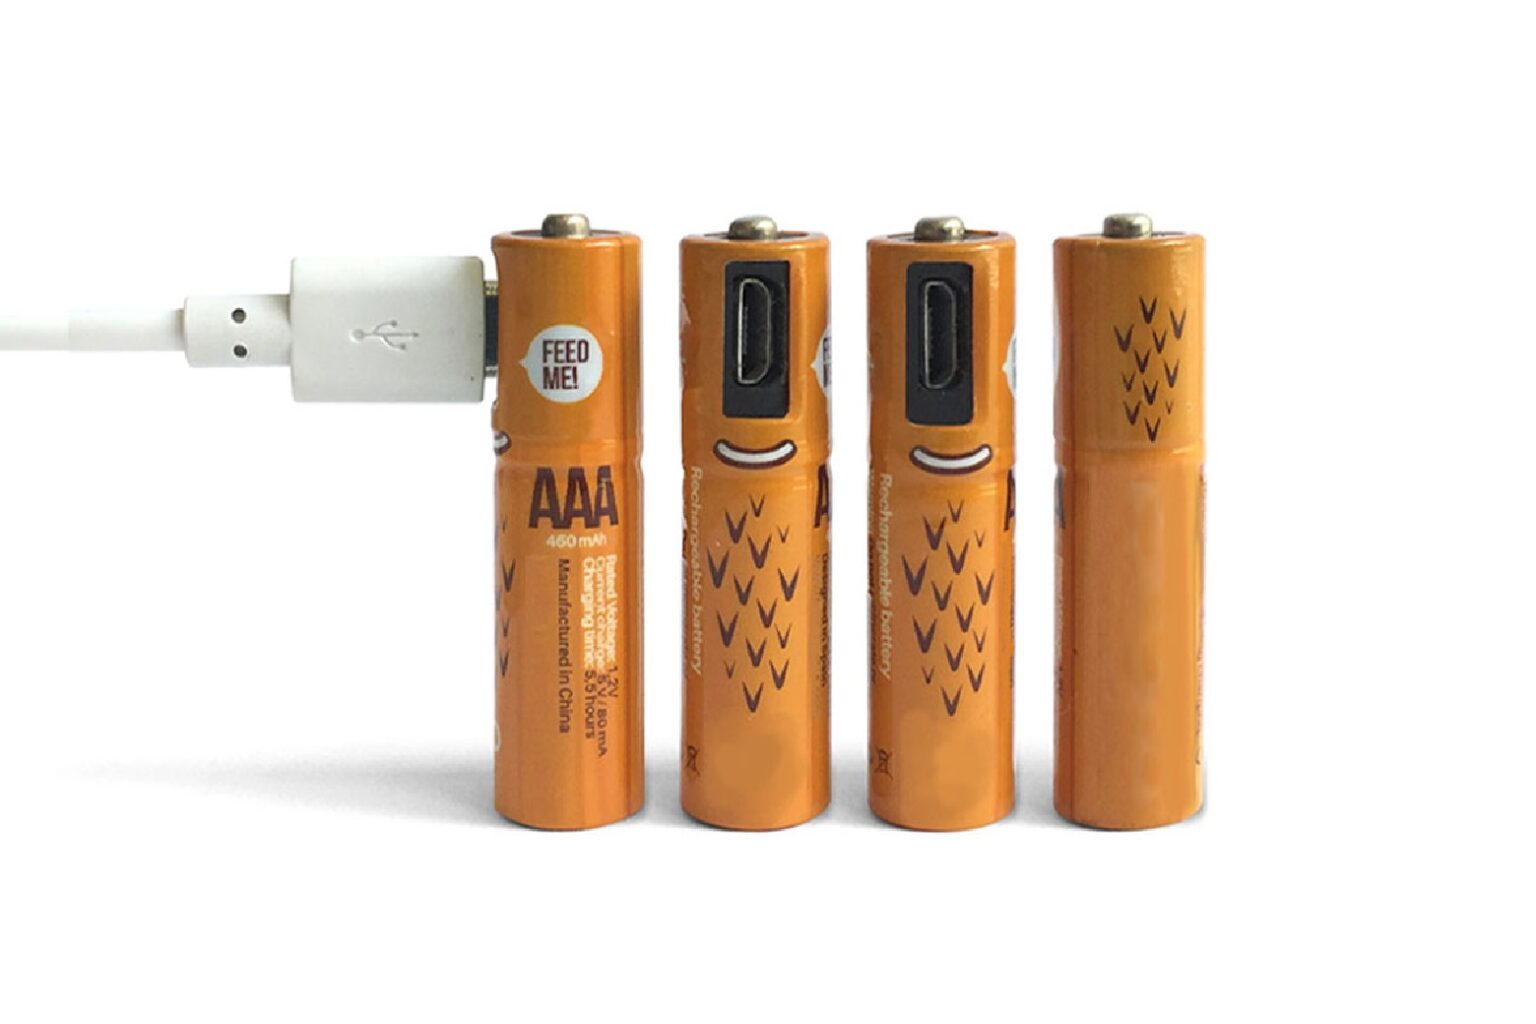 These $16 USB-rechargeable batteries stop 2,000 from entering landfills.